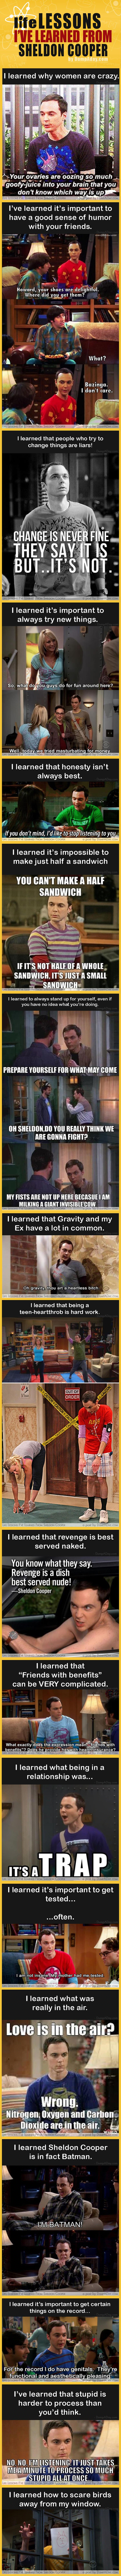 Life Lessons I've Learned From Sheldon Cooper by DumpADay